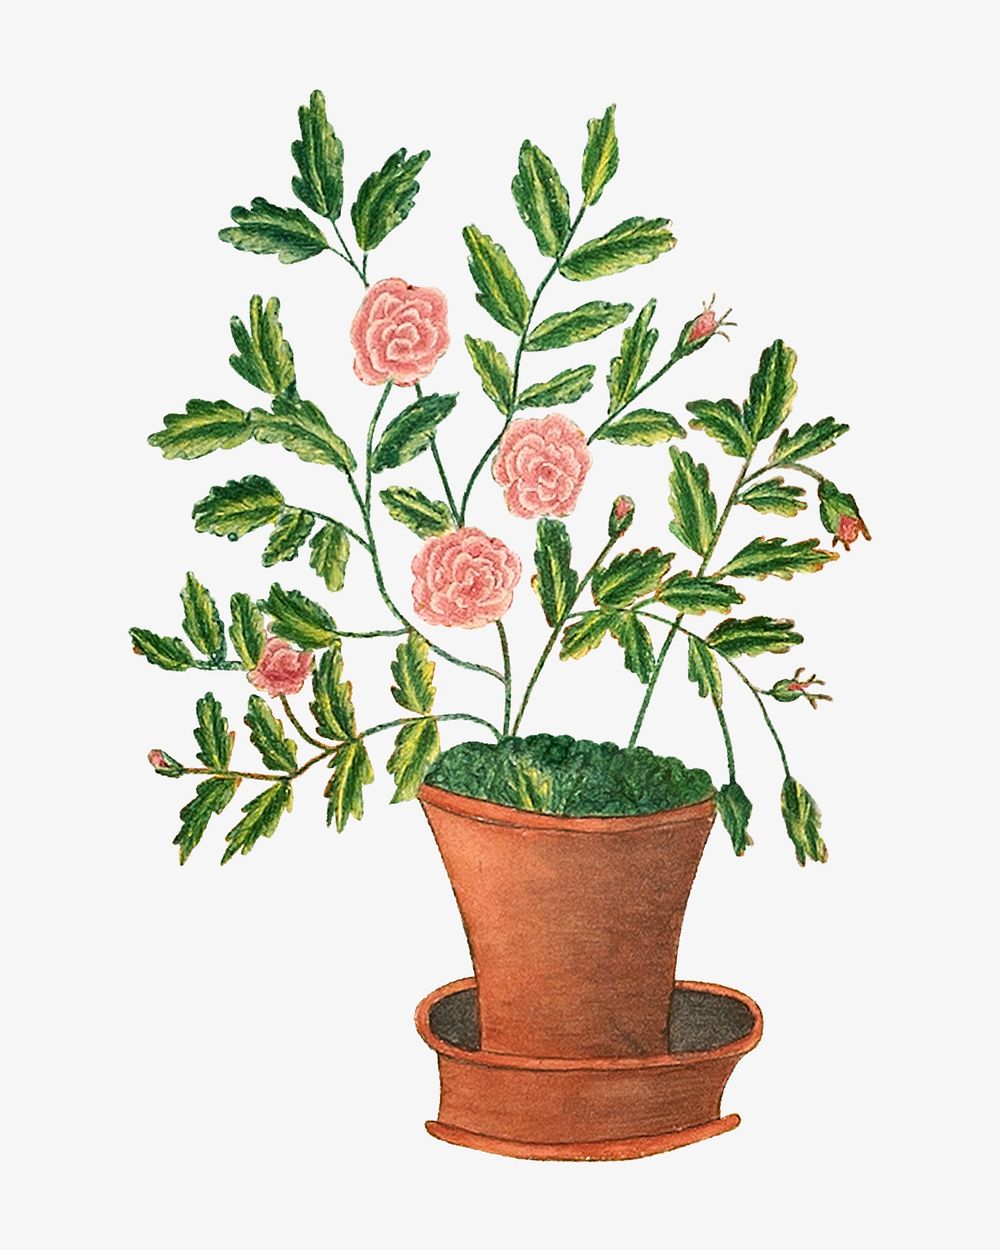 Potted rose flower, vintage botanical illustration by Sarah P. Wells. Remixed by rawpixel.